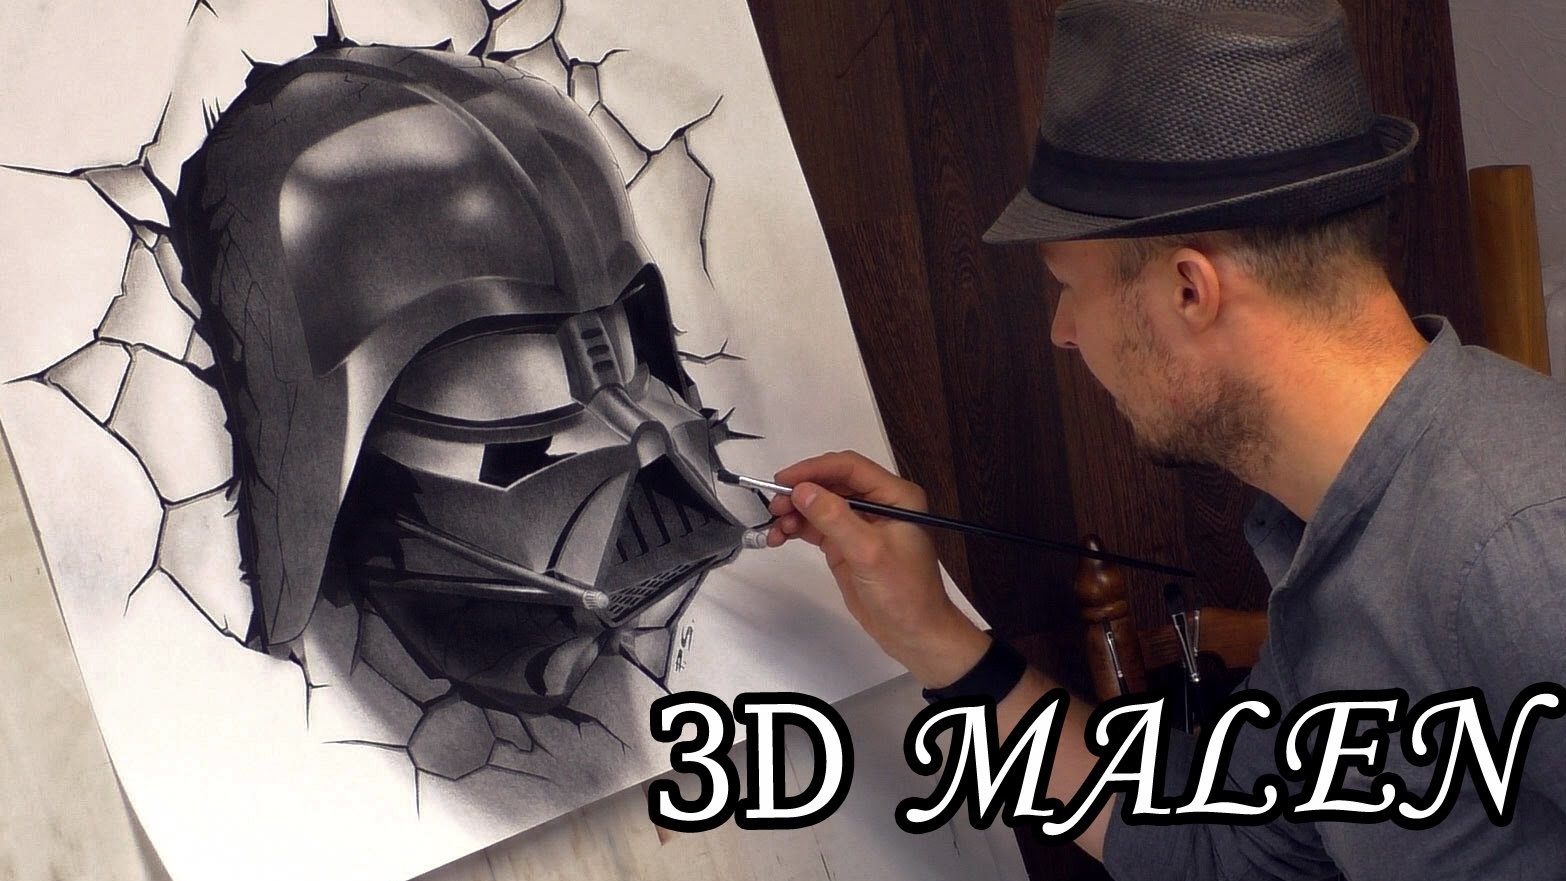 Darth Vader Busts Out in Star Wars 3D Speed Painting